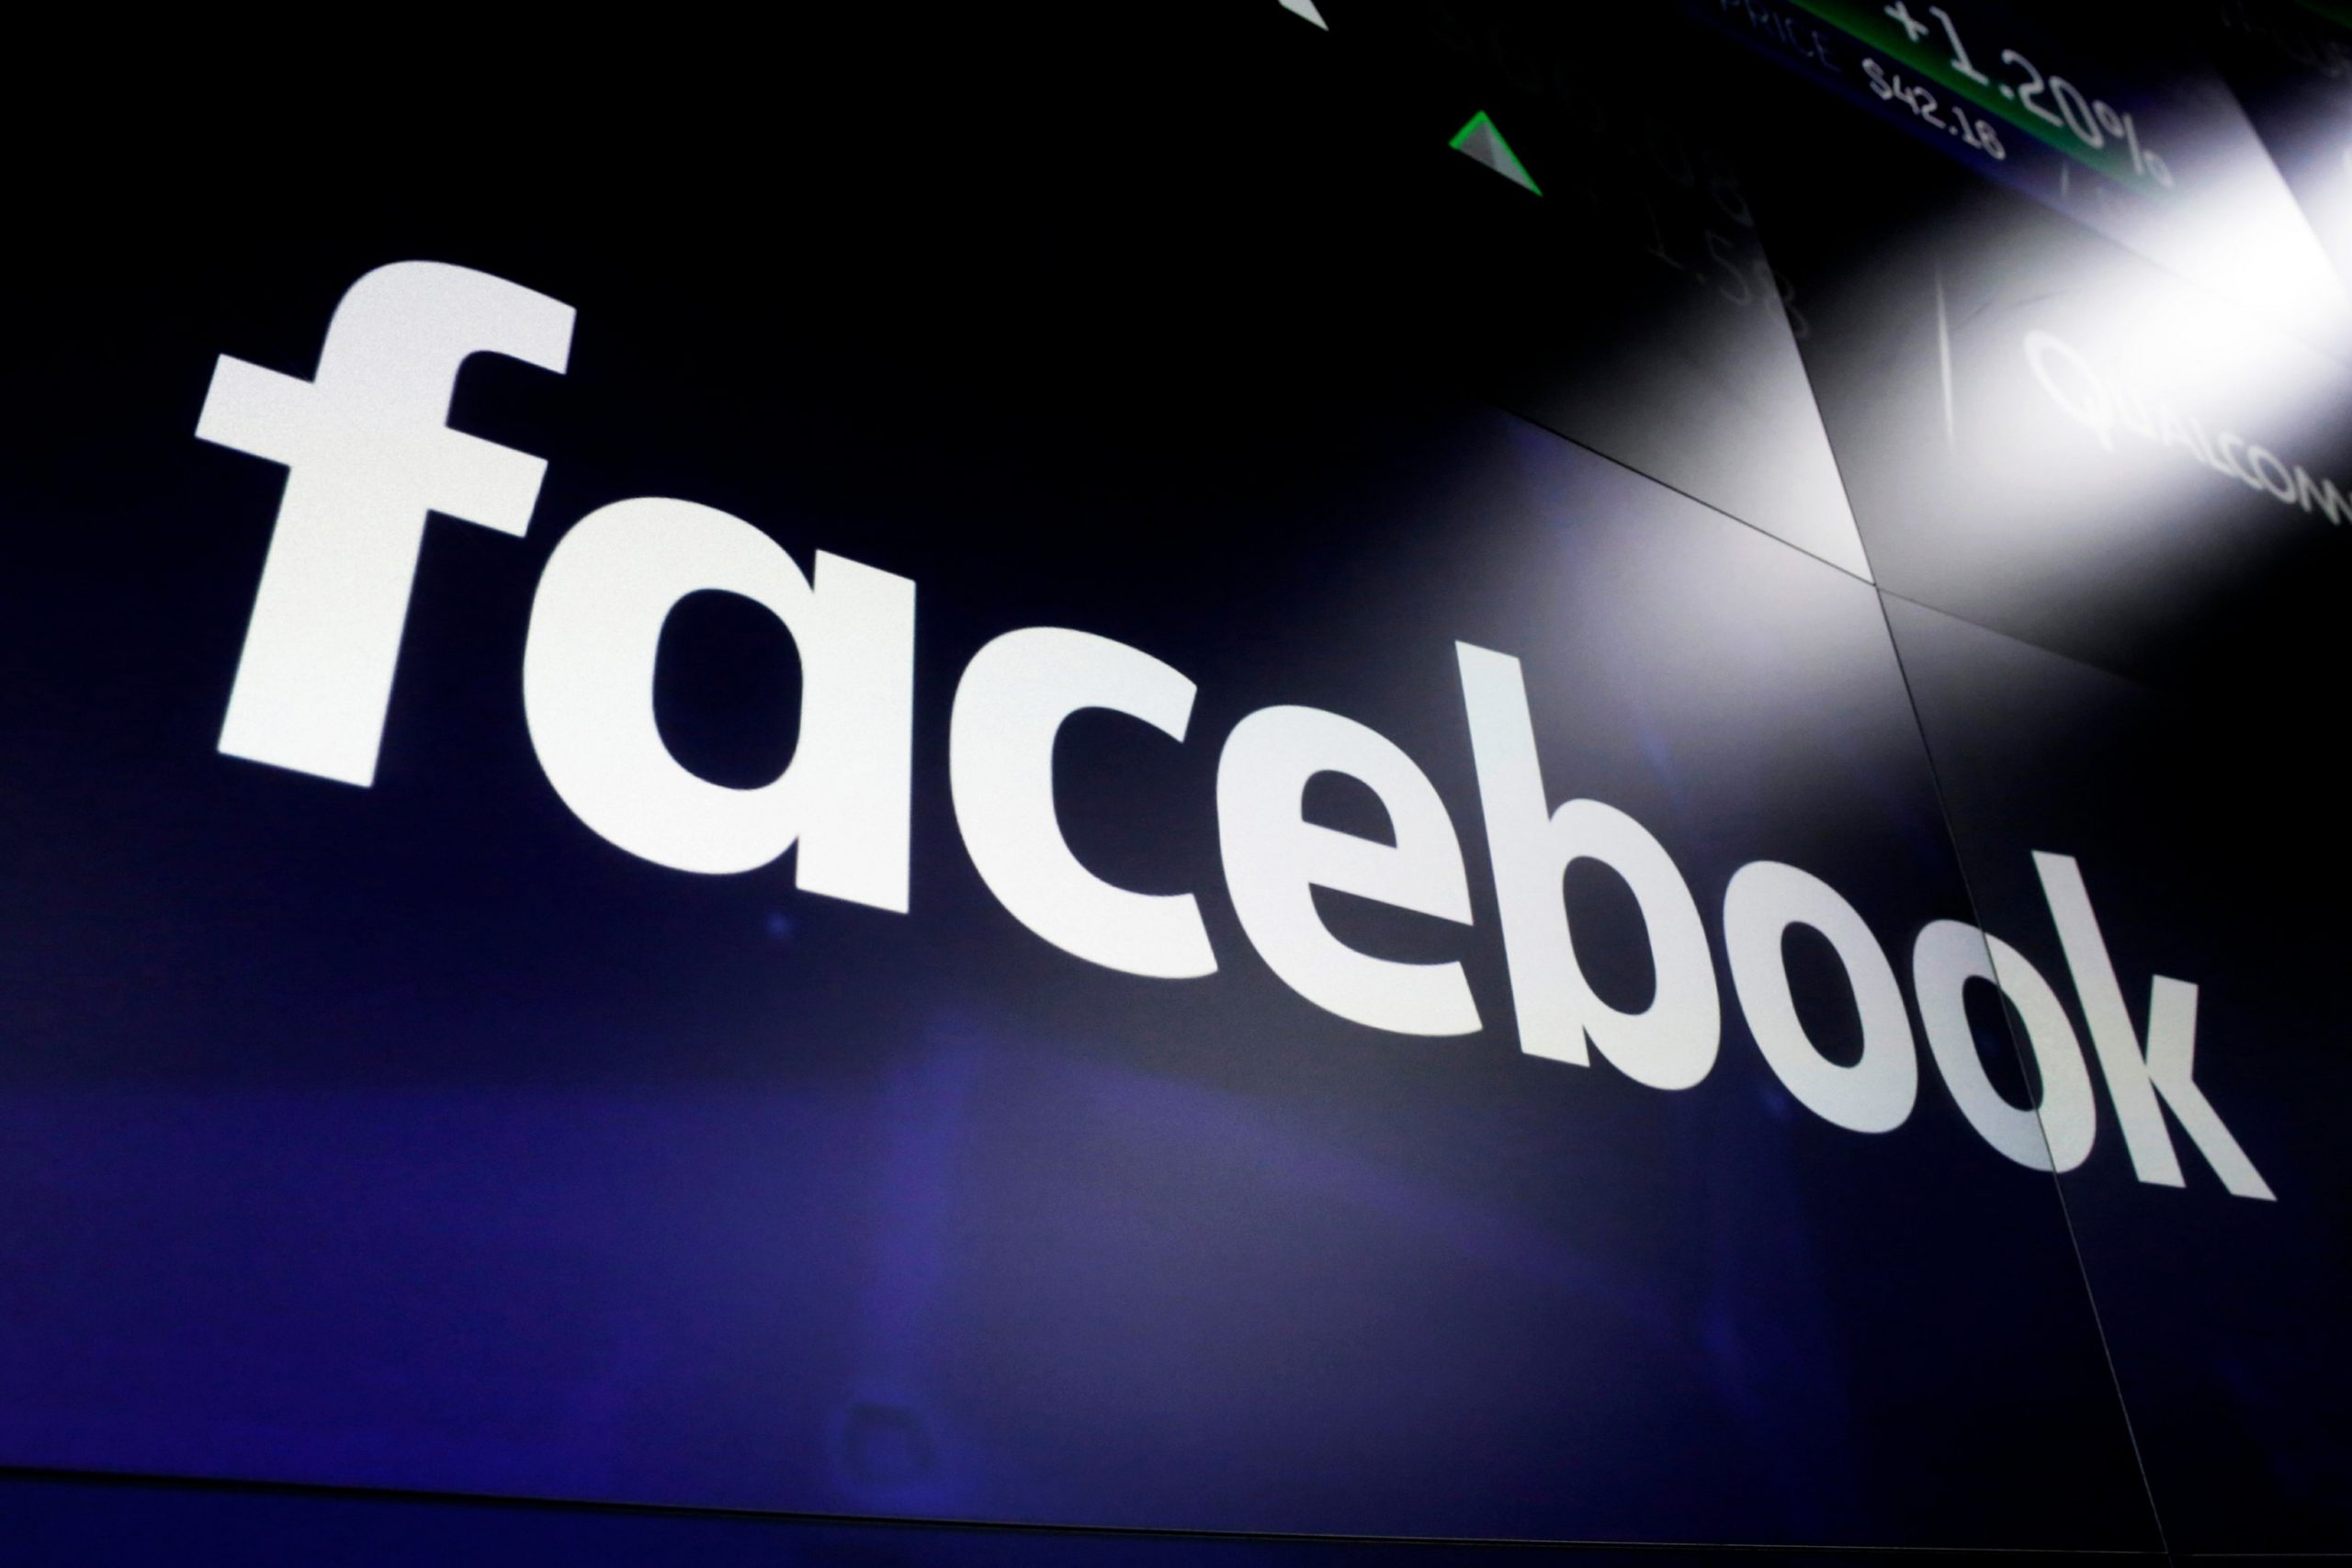 Judge agrees to settle $ 650 million Facebook privacy lawsuit